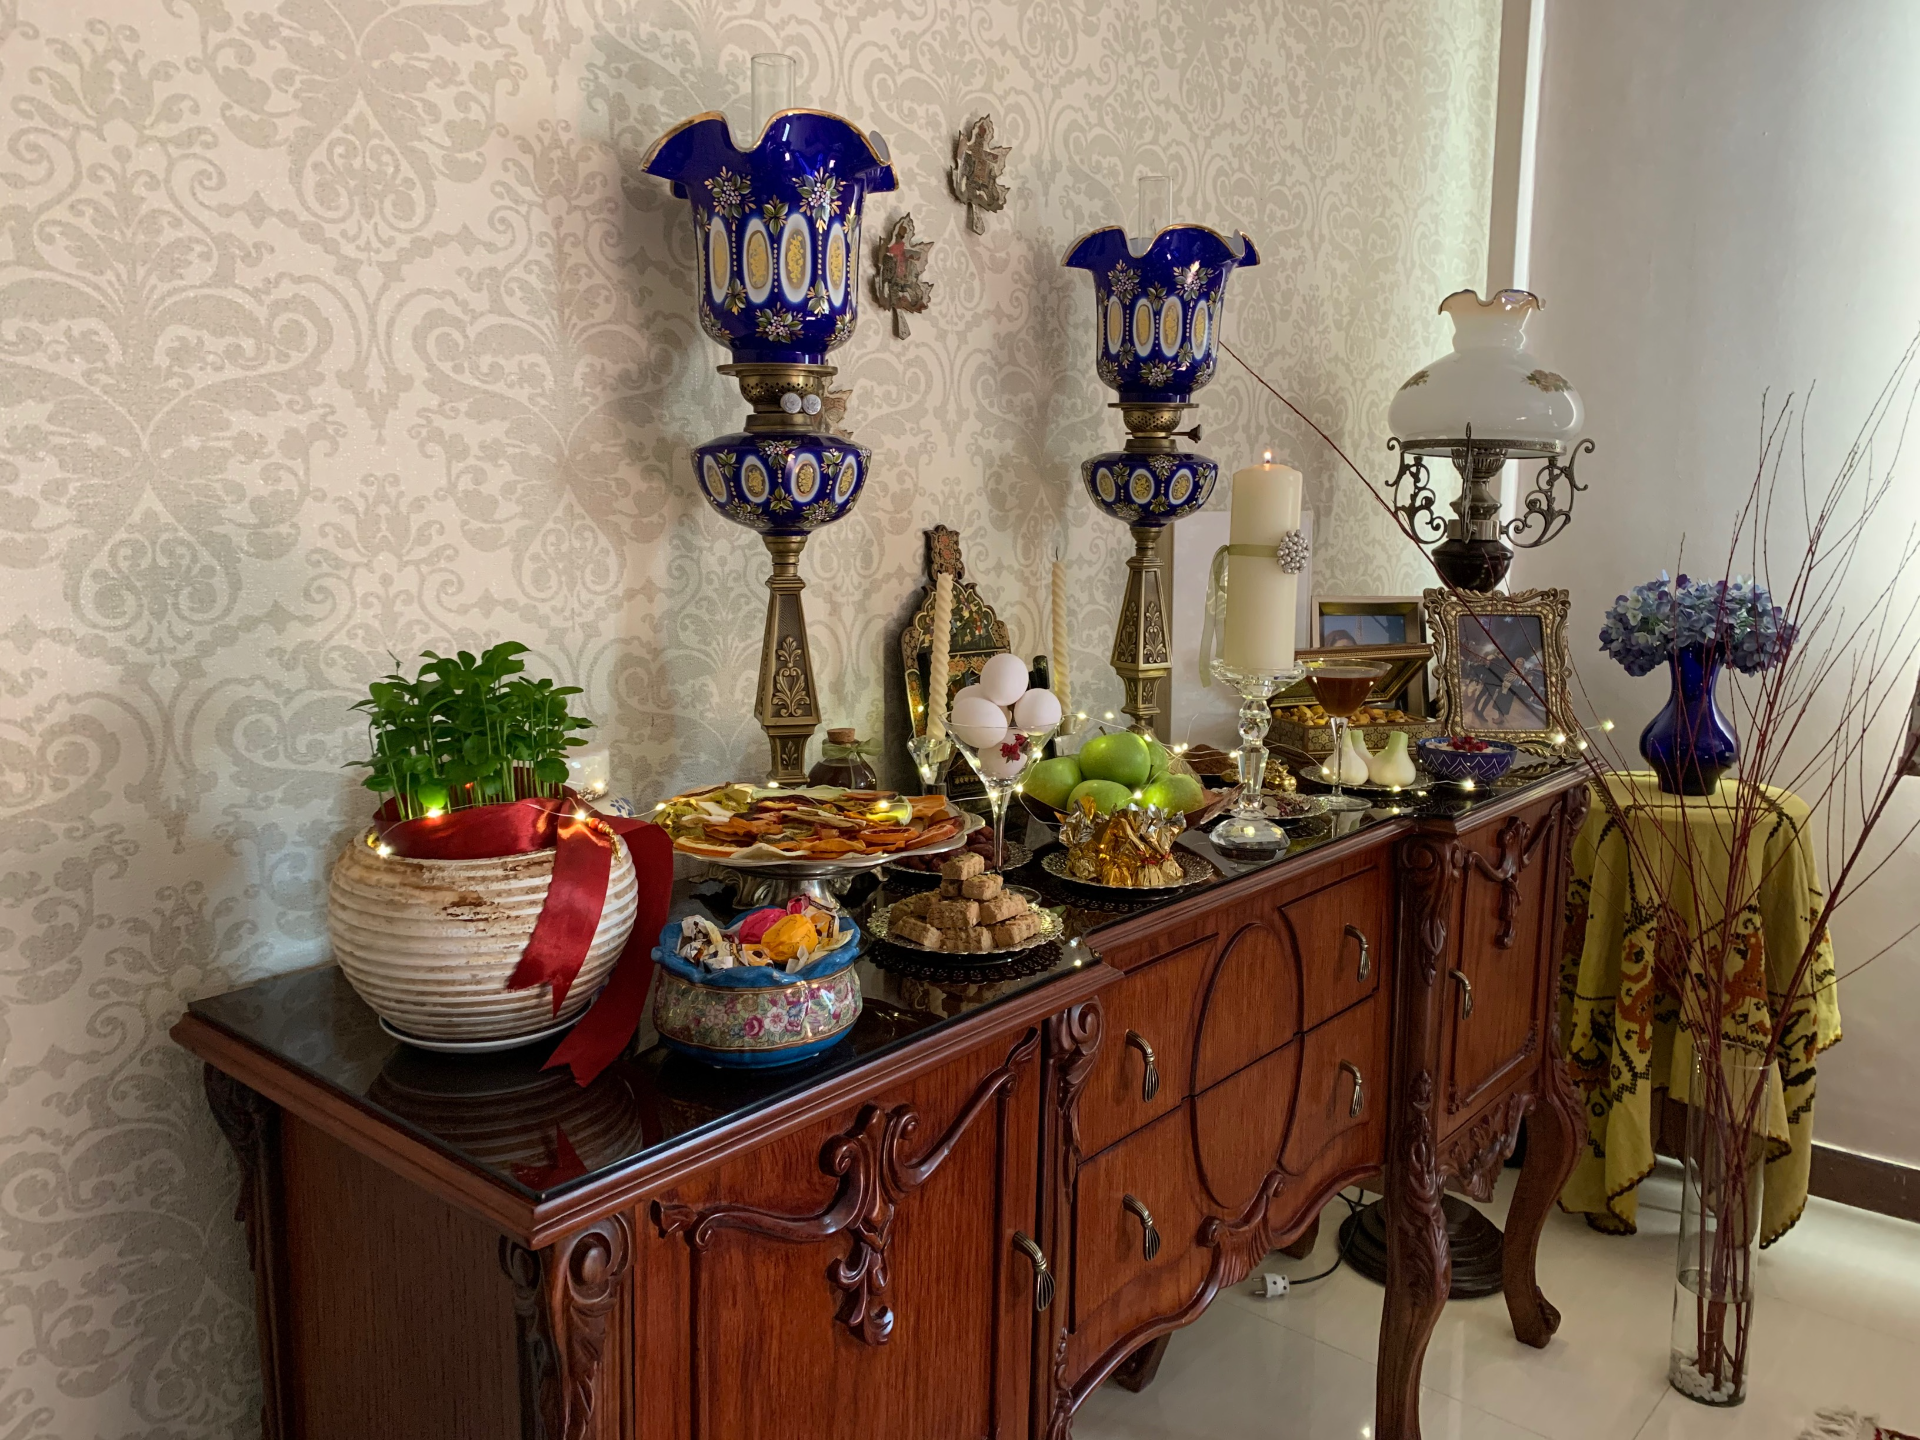 Traditional food laid out for celebration of Nowruz